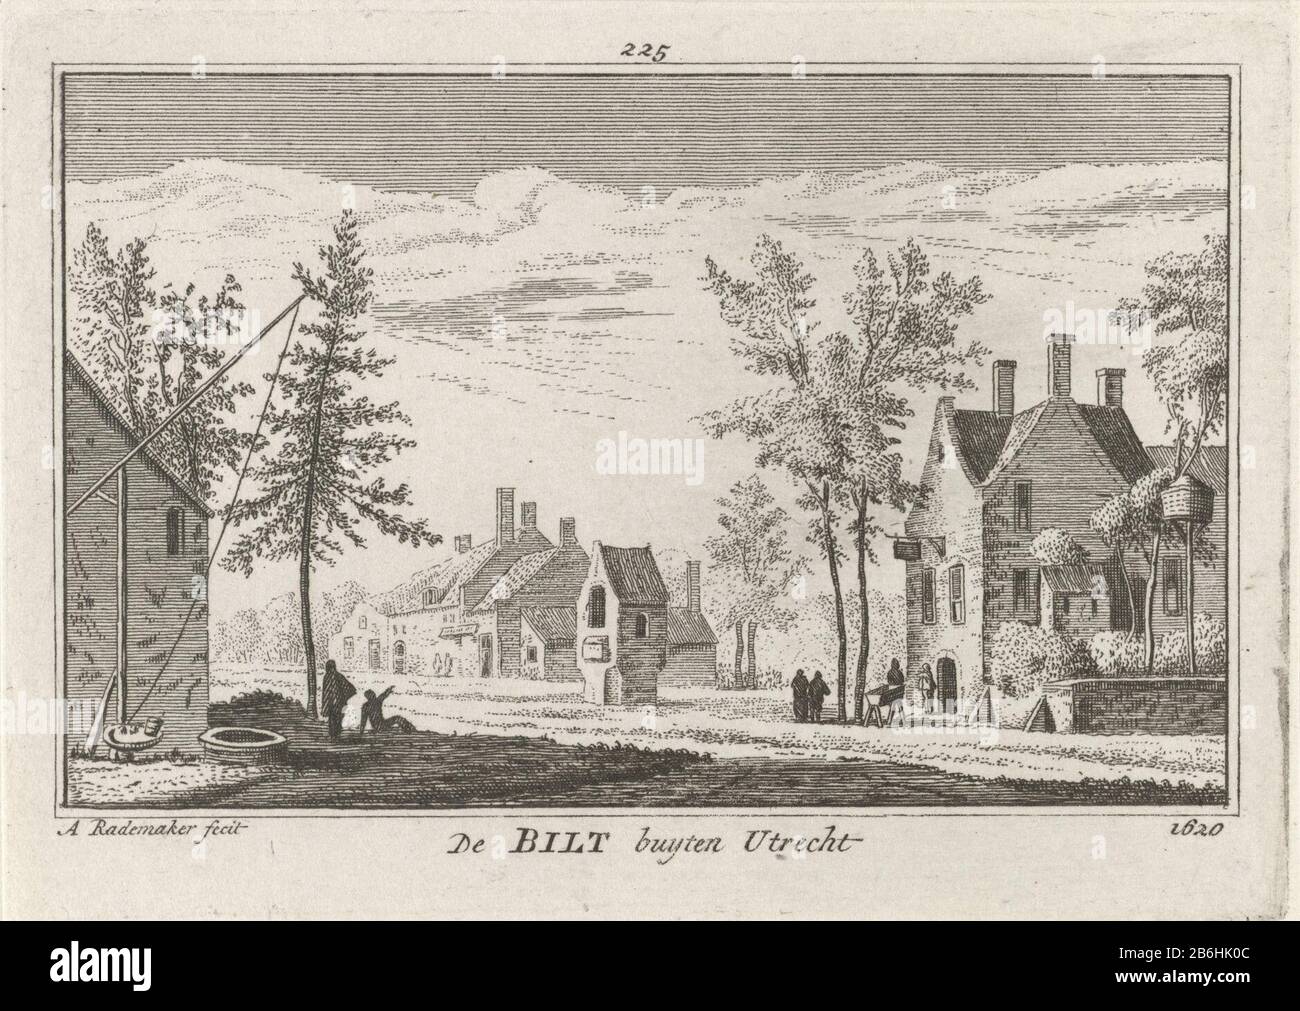 De Bilt De Bilt Utrecht buyten 1620 (title object) View of the village De Bilt and St. Petronella's chapel in the situation around 1620. Manufacturer : printmaker: Abraham Rademaker (listed building) publisher: Willem Barents Publisher: Antoni Schoonenburg Place manufacture: Amsterdam Date: 1727 - 1733 Physical features: etching material: paper Technique: etching dimensions: plate edge: h 80 mm × W 115 mmToelichtingIllustratie out: Abraham Rademaker, Matthaeus Brouërius of Niedek, Isaac Le Long, Cabinet Dutch and Kleefsche outheden and (...) especially for urban and rural buildings, Willem Bar Stock Photo